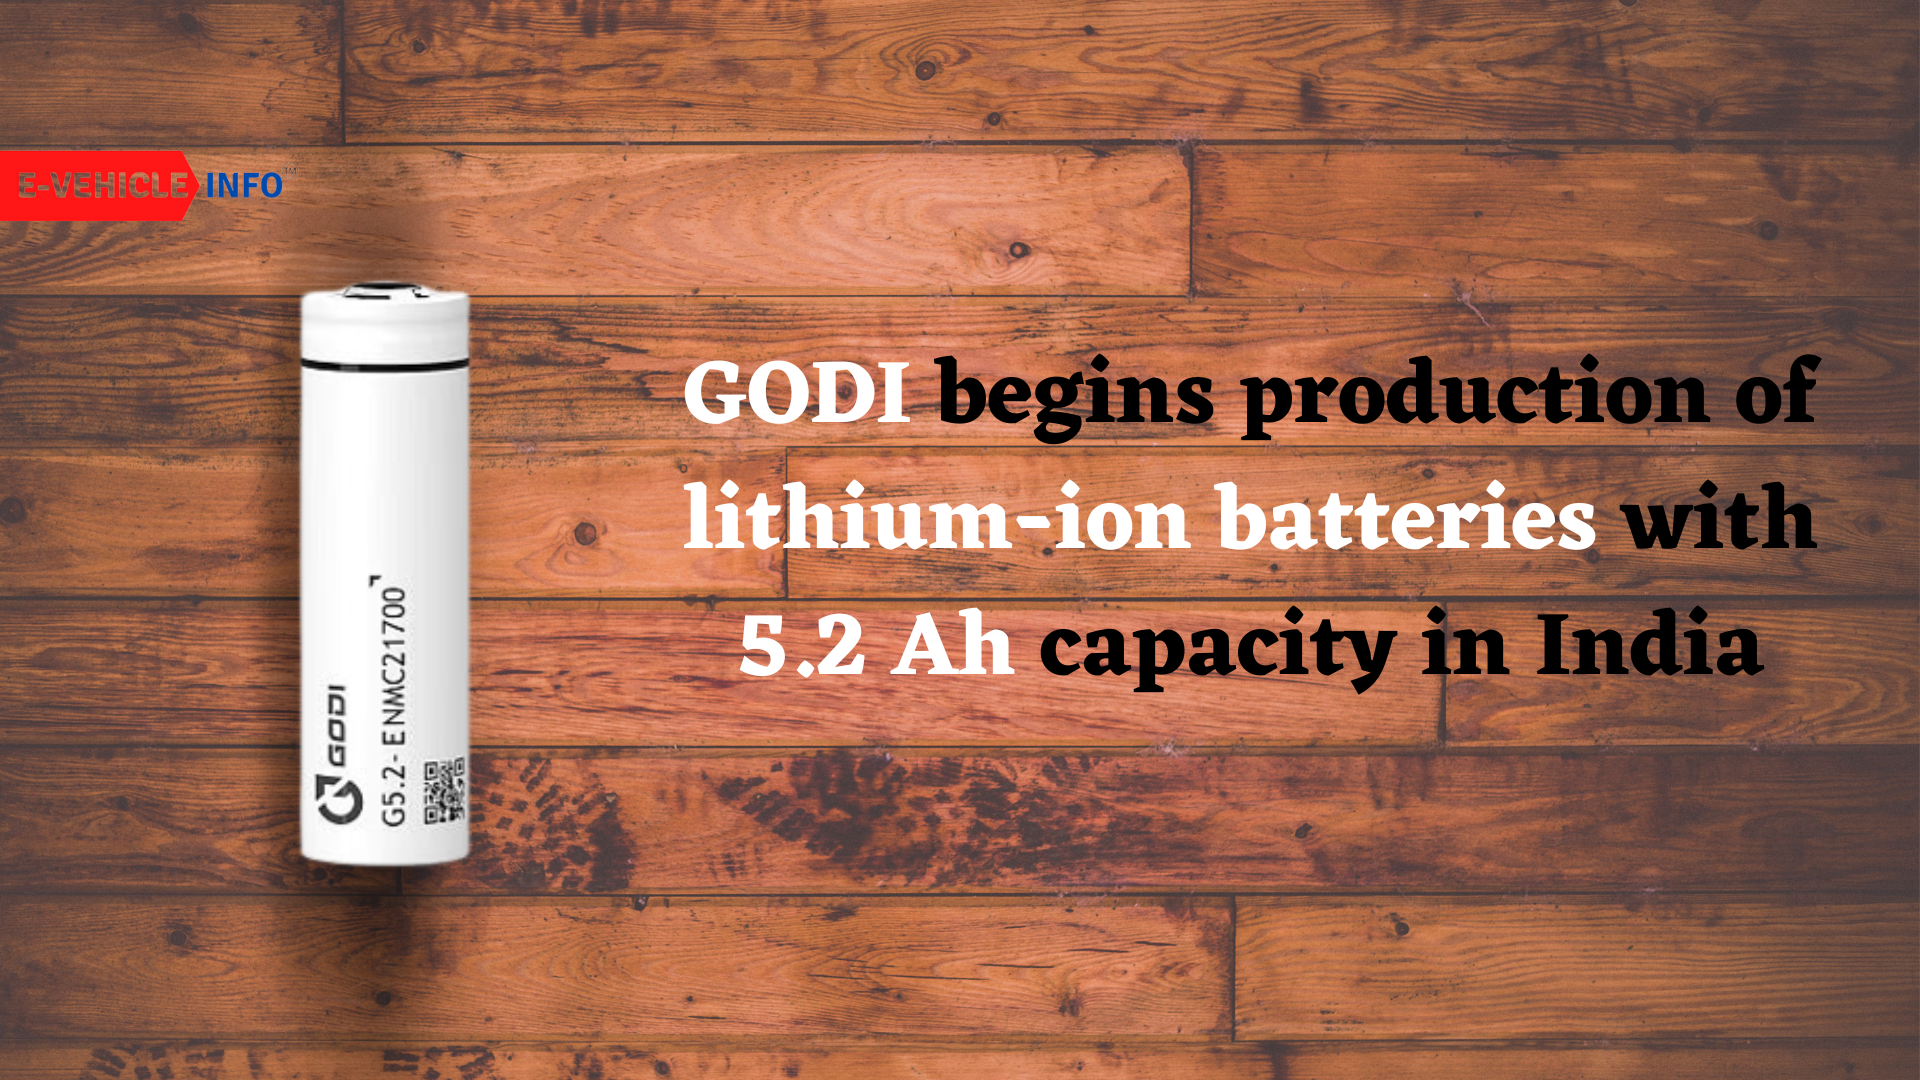 GODI begins production of Lithium-ion Batteries with 5.2 Ah capacity in India